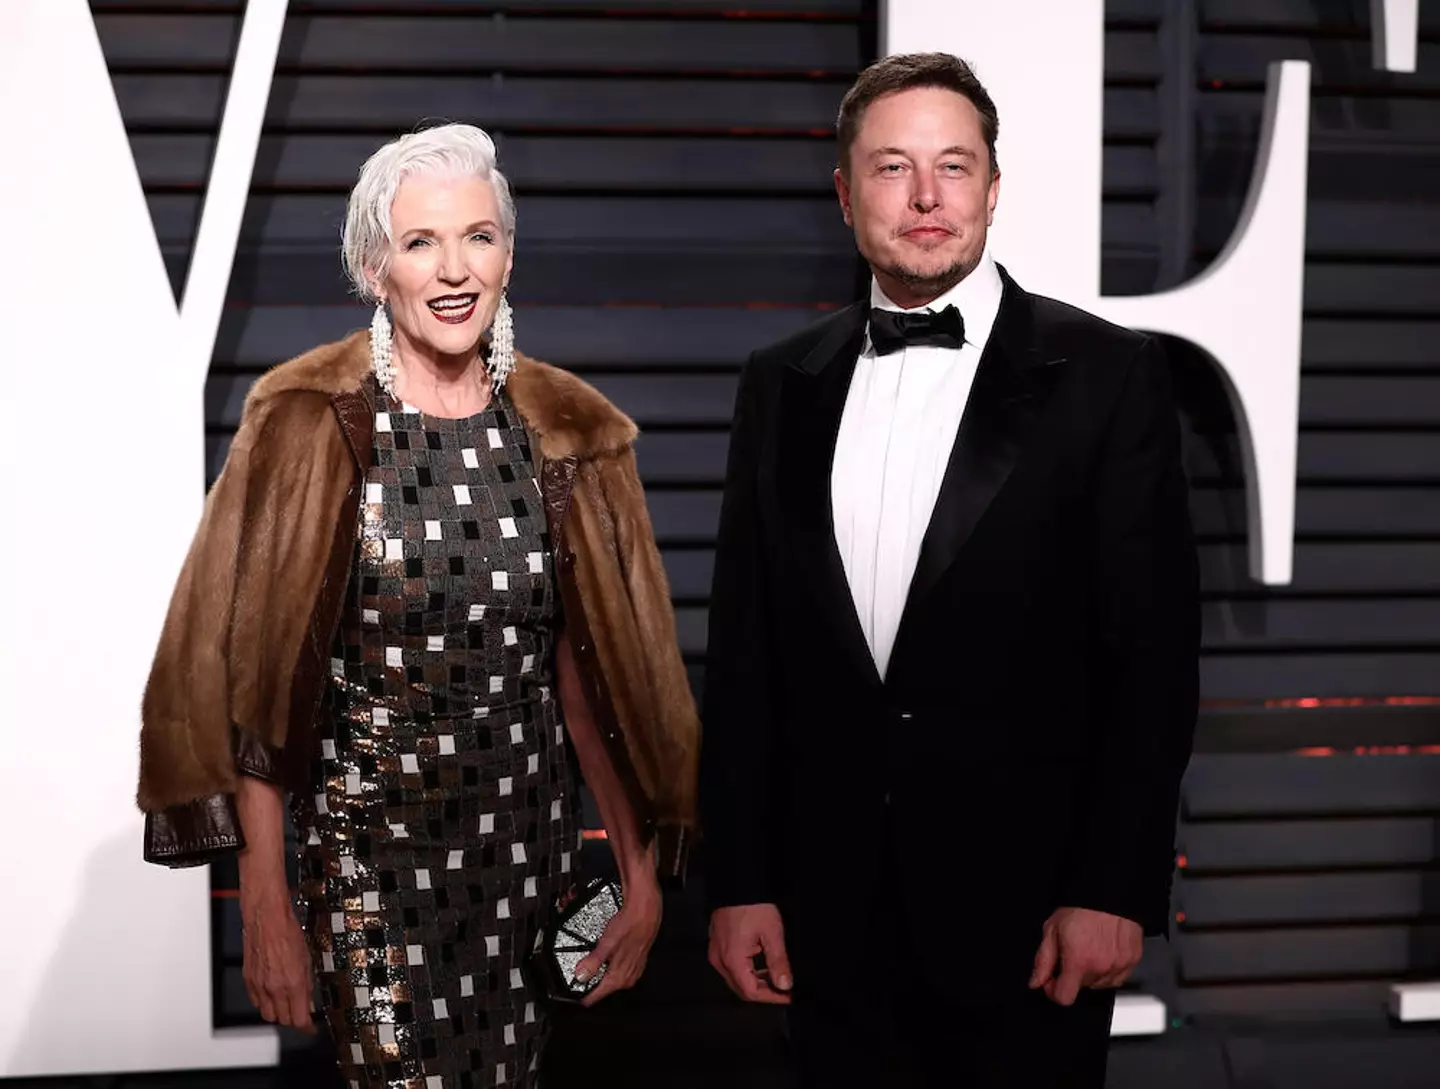 The Tesla founder with his mum Maye Musk.